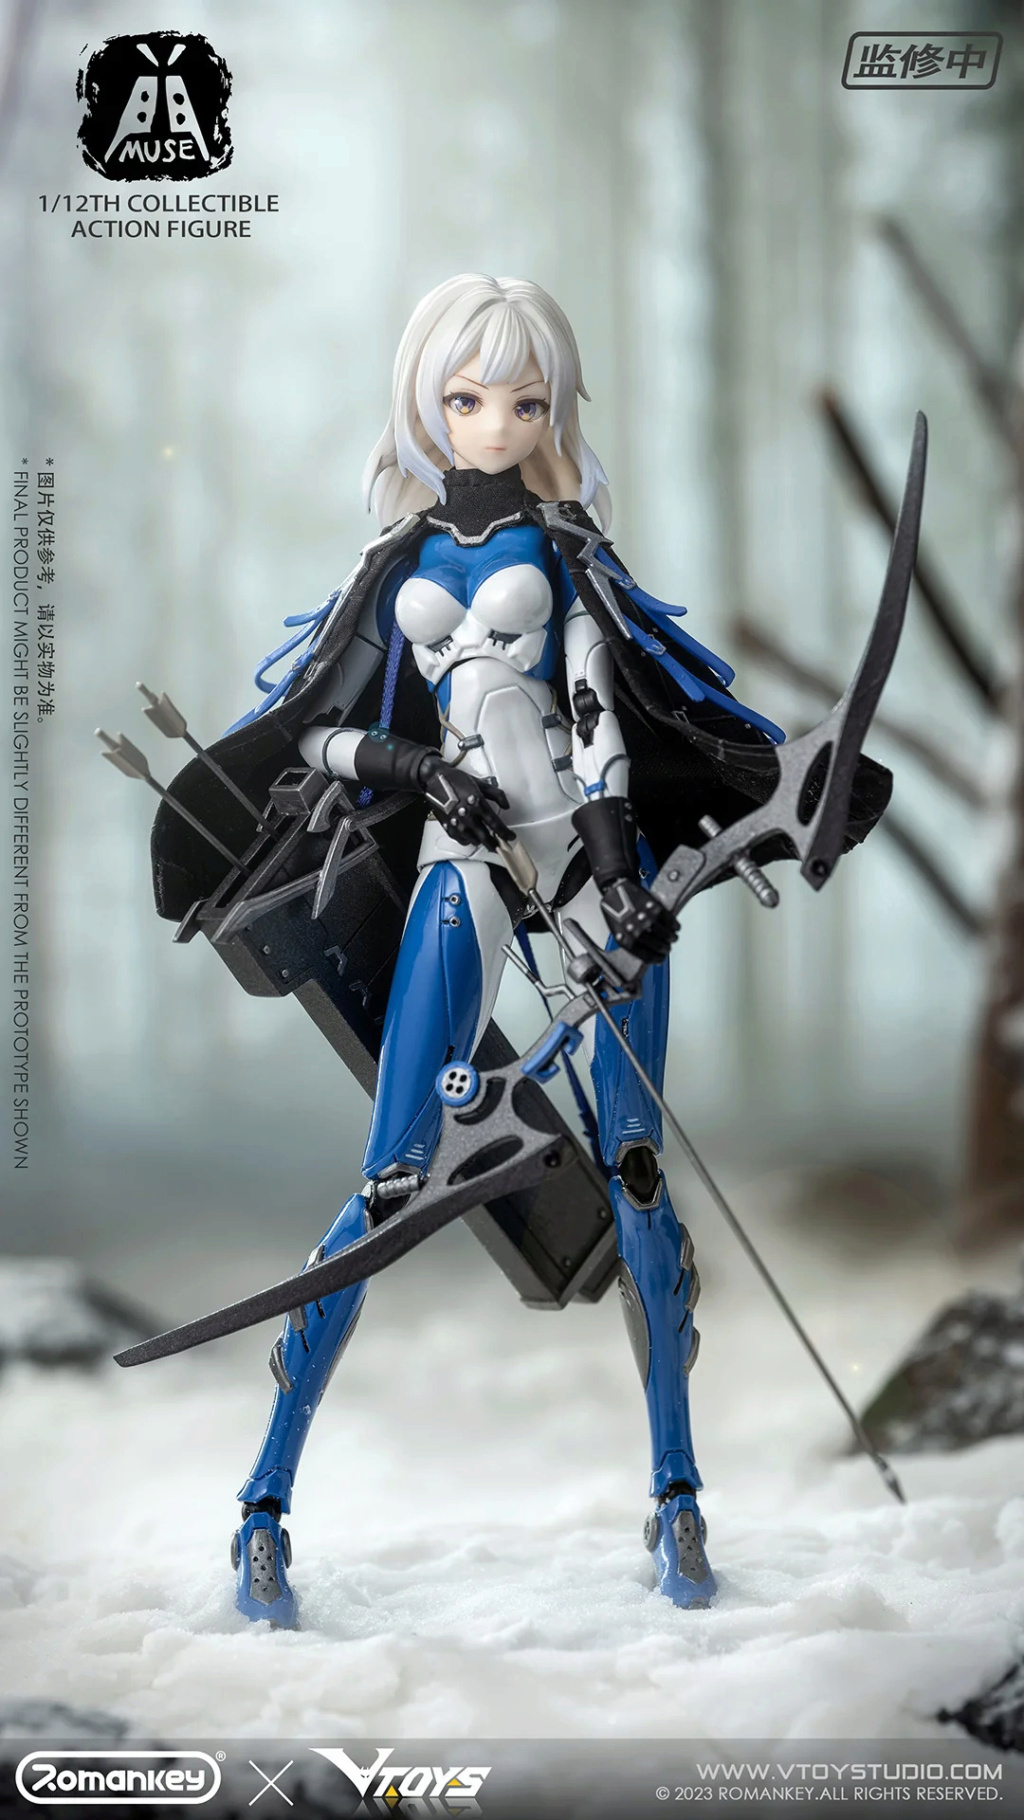 NEW PRODUCT: VTOYS x Romankey 1/12 Scale Muse 01_f3711